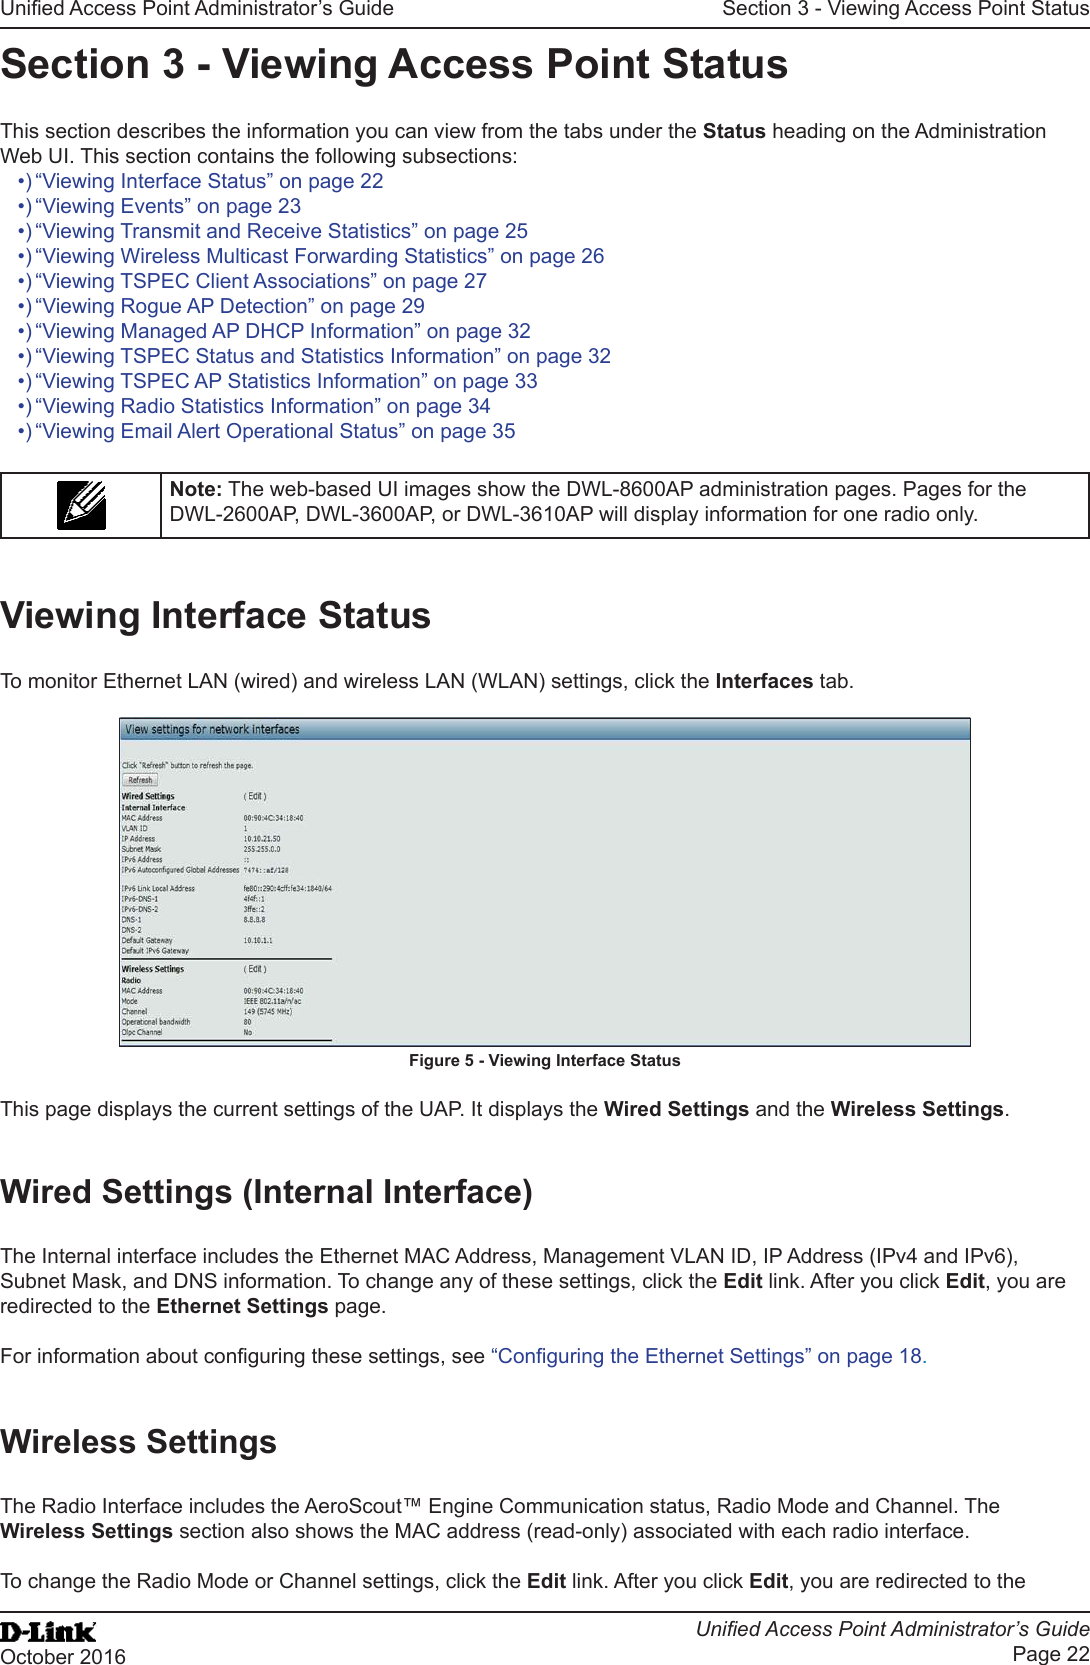 Unied Access Point Administrator’s GuideUnied Access Point Administrator’s GuidePage 22October 2016Section 3 - Viewing Access Point StatusSection 3 - Viewing Access Point StatusThis section describes the information you can view from the tabs under the Status heading on the Administration Web UI. This section contains the following subsections:•) “Viewing Interface Status” on page 22•) “Viewing Events” on page 23•) “Viewing Transmit and Receive Statistics” on page 25•) “Viewing Wireless Multicast Forwarding Statistics” on page 26•) “Viewing TSPEC Client Associations” on page 27•) “Viewing Rogue AP Detection” on page 29•) “Viewing Managed AP DHCP Information” on page 32•) “Viewing TSPEC Status and Statistics Information” on page 32•) “Viewing TSPEC AP Statistics Information” on page 33•) “Viewing Radio Statistics Information” on page 34•) “Viewing Email Alert Operational Status” on page 35Note: The web-based UI images show the DWL-8600AP administration pages. Pages for the DWL-2600AP, DWL-3600AP, or DWL-3610AP will display information for one radio only.Viewing Interface StatusTo monitor Ethernet LAN (wired) and wireless LAN (WLAN) settings, click the Interfaces tab.Figure 5 - Viewing Interface StatusThis page displays the current settings of the UAP. It displays the Wired Settings and the Wireless Settings.Wired Settings (Internal Interface)The Internal interface includes the Ethernet MAC Address, Management VLAN ID, IP Address (IPv4 and IPv6), Subnet Mask, and DNS information. To change any of these settings, click the Edit link. After you click Edit, you are redirected to the Ethernet Settings page.For information about conguring these settings, see “Conguring the Ethernet Settings” on page 18.Wireless SettingsThe Radio Interface includes the AeroScout™ Engine Communication status, Radio Mode and Channel. The Wireless Settings section also shows the MAC address (read-only) associated with each radio interface. To change the Radio Mode or Channel settings, click the Edit link. After you click Edit, you are redirected to the 